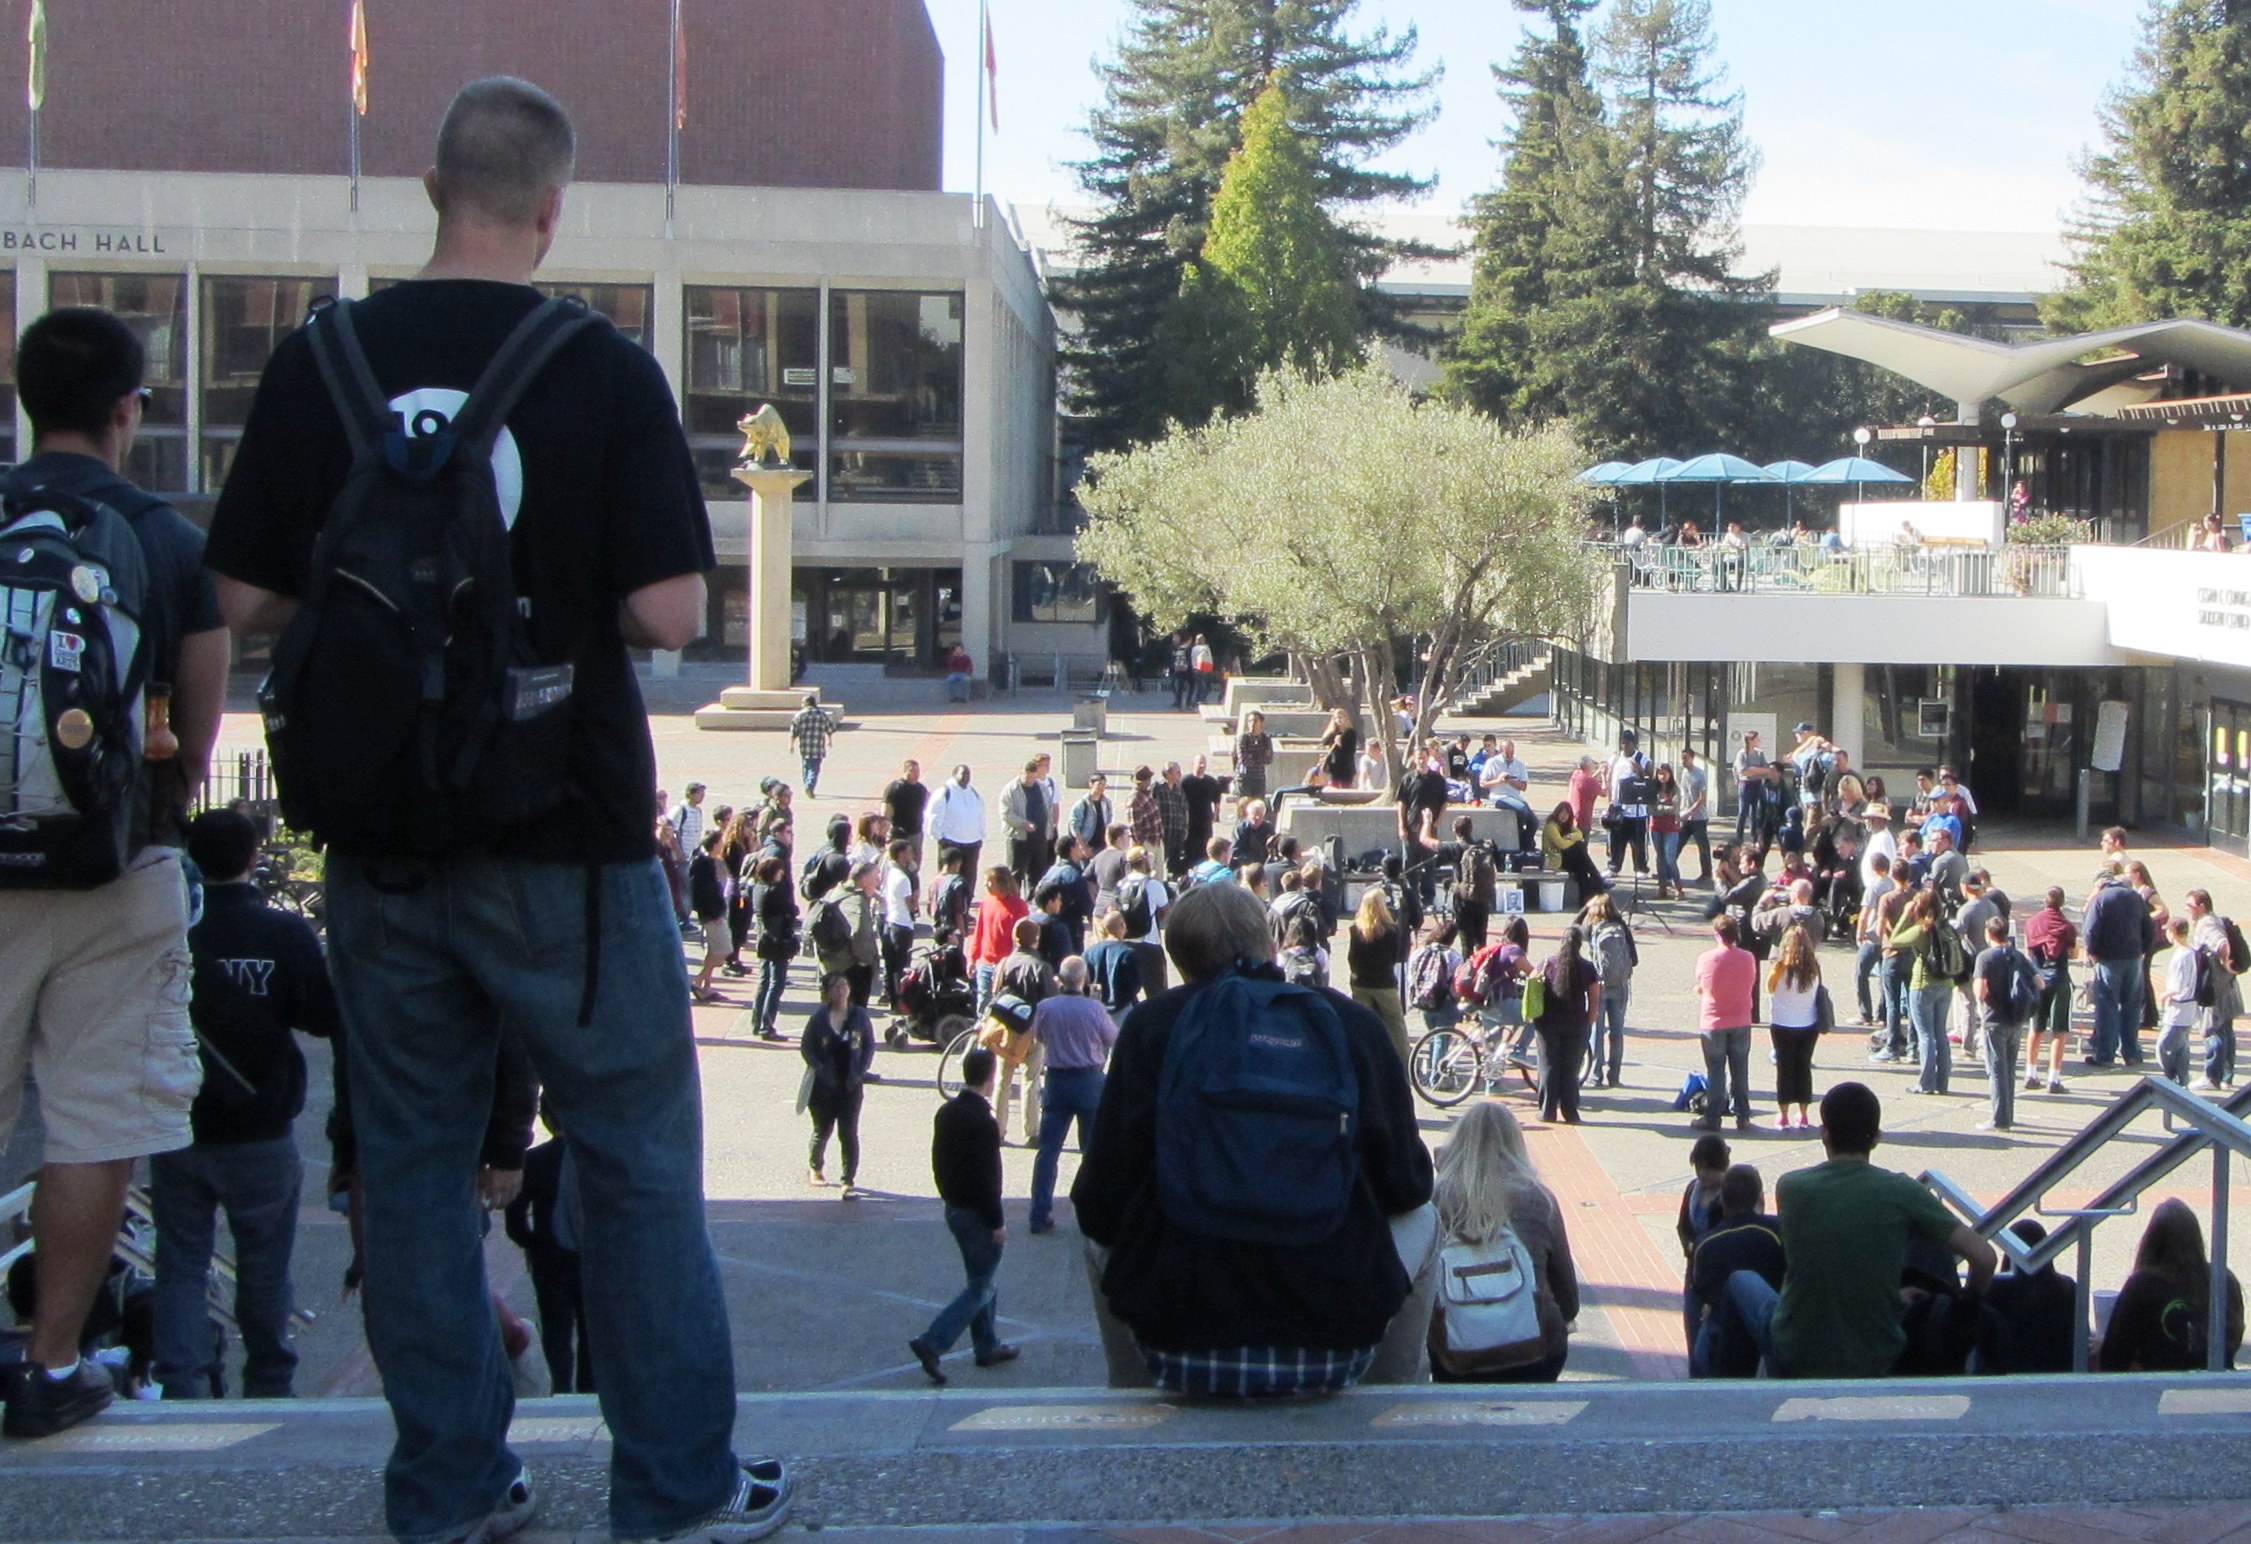 Students gather to hear Ray Comfort’s ministry at Berkeley.